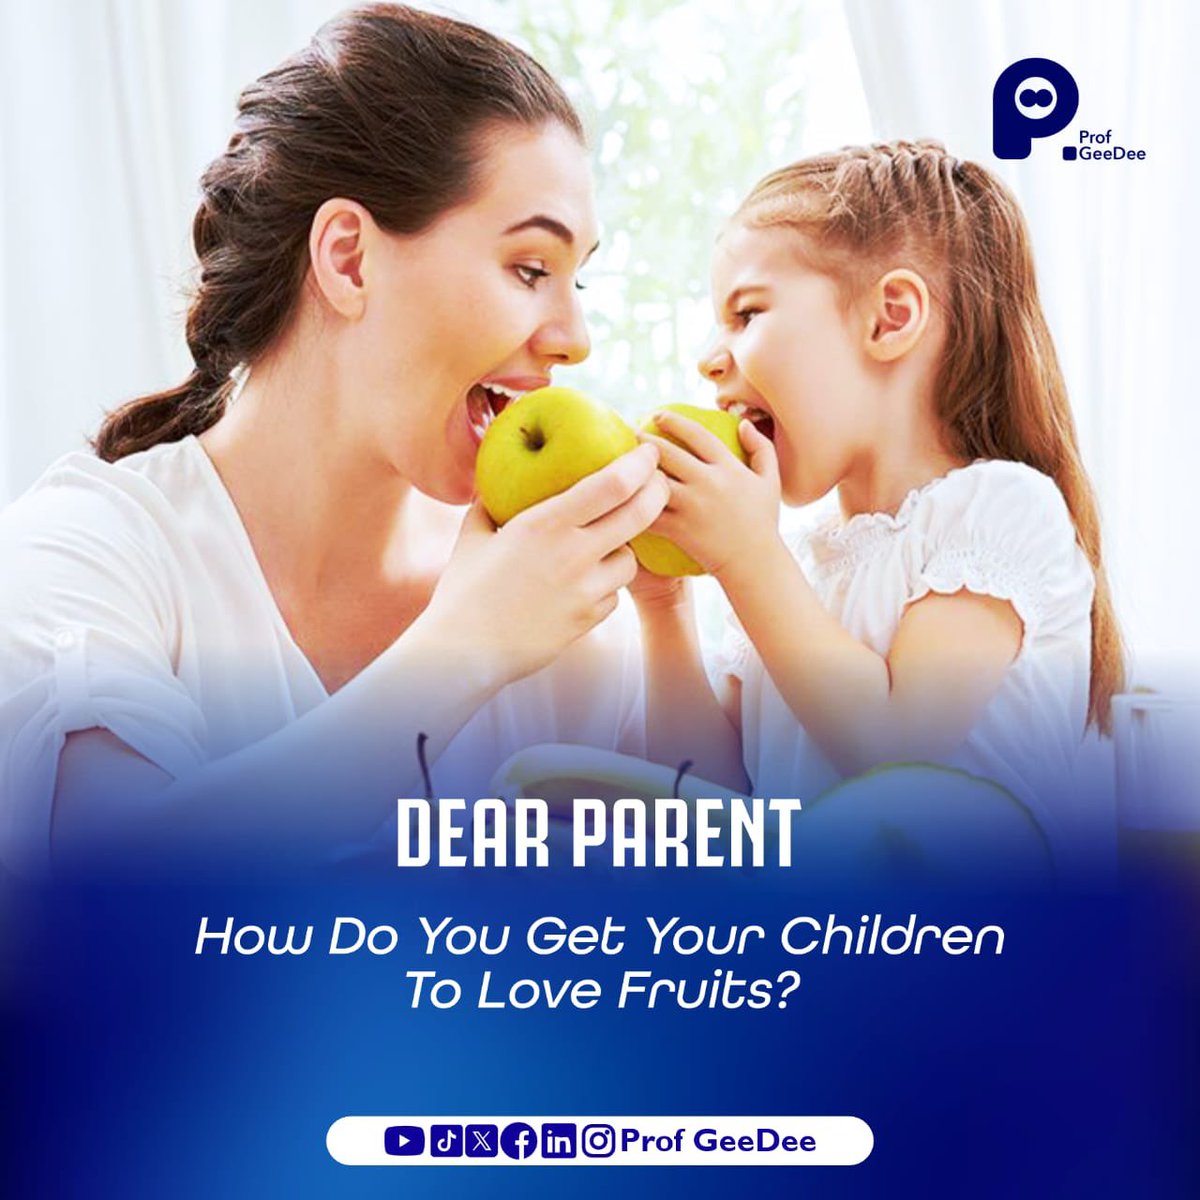 You can encourage your children to try different fruits and love them.
Some ways you can get your children to love fruits :

*Eat fruits regularly in their presence.
*Cut fruits into fun shapes.

#earlyyears
#earlylearning
#earlychildhooddevelopment
#dearparentseries
#profgeedee